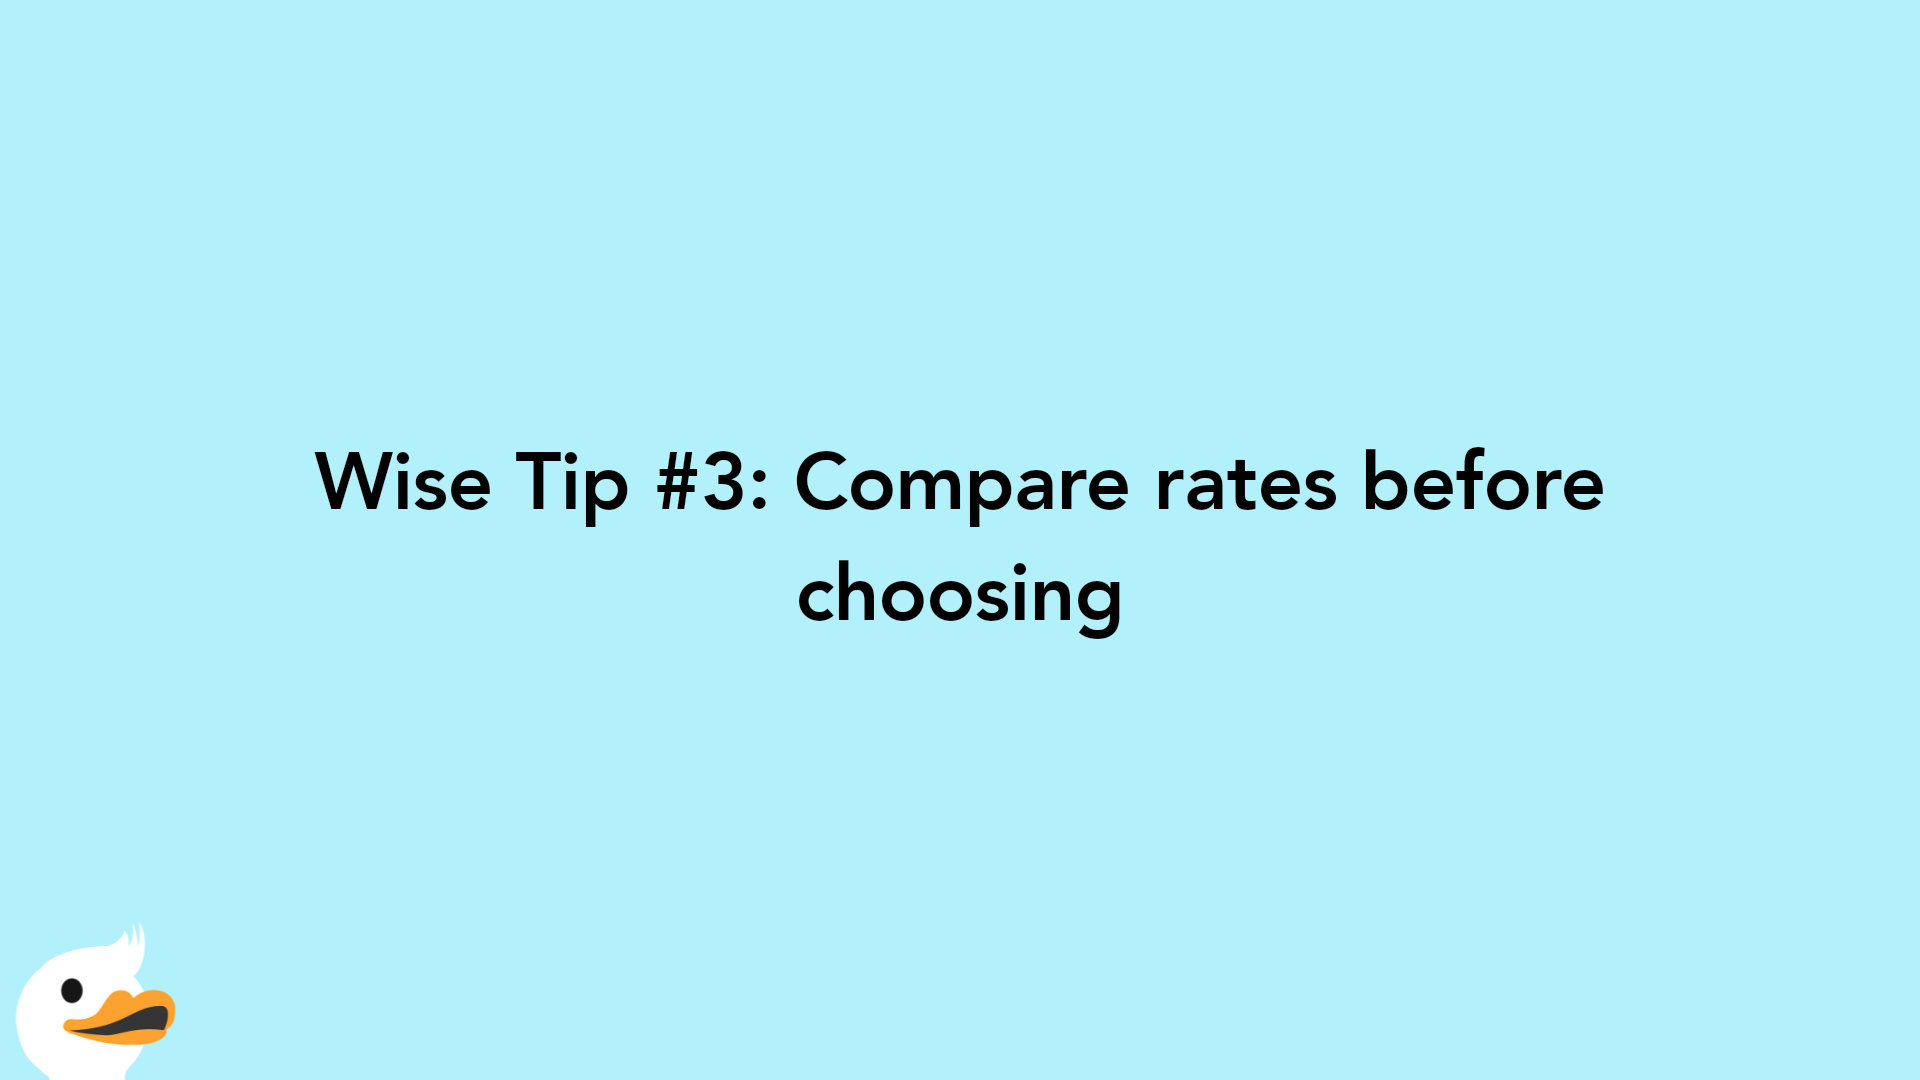 Wise Tip #3: Compare rates before choosing